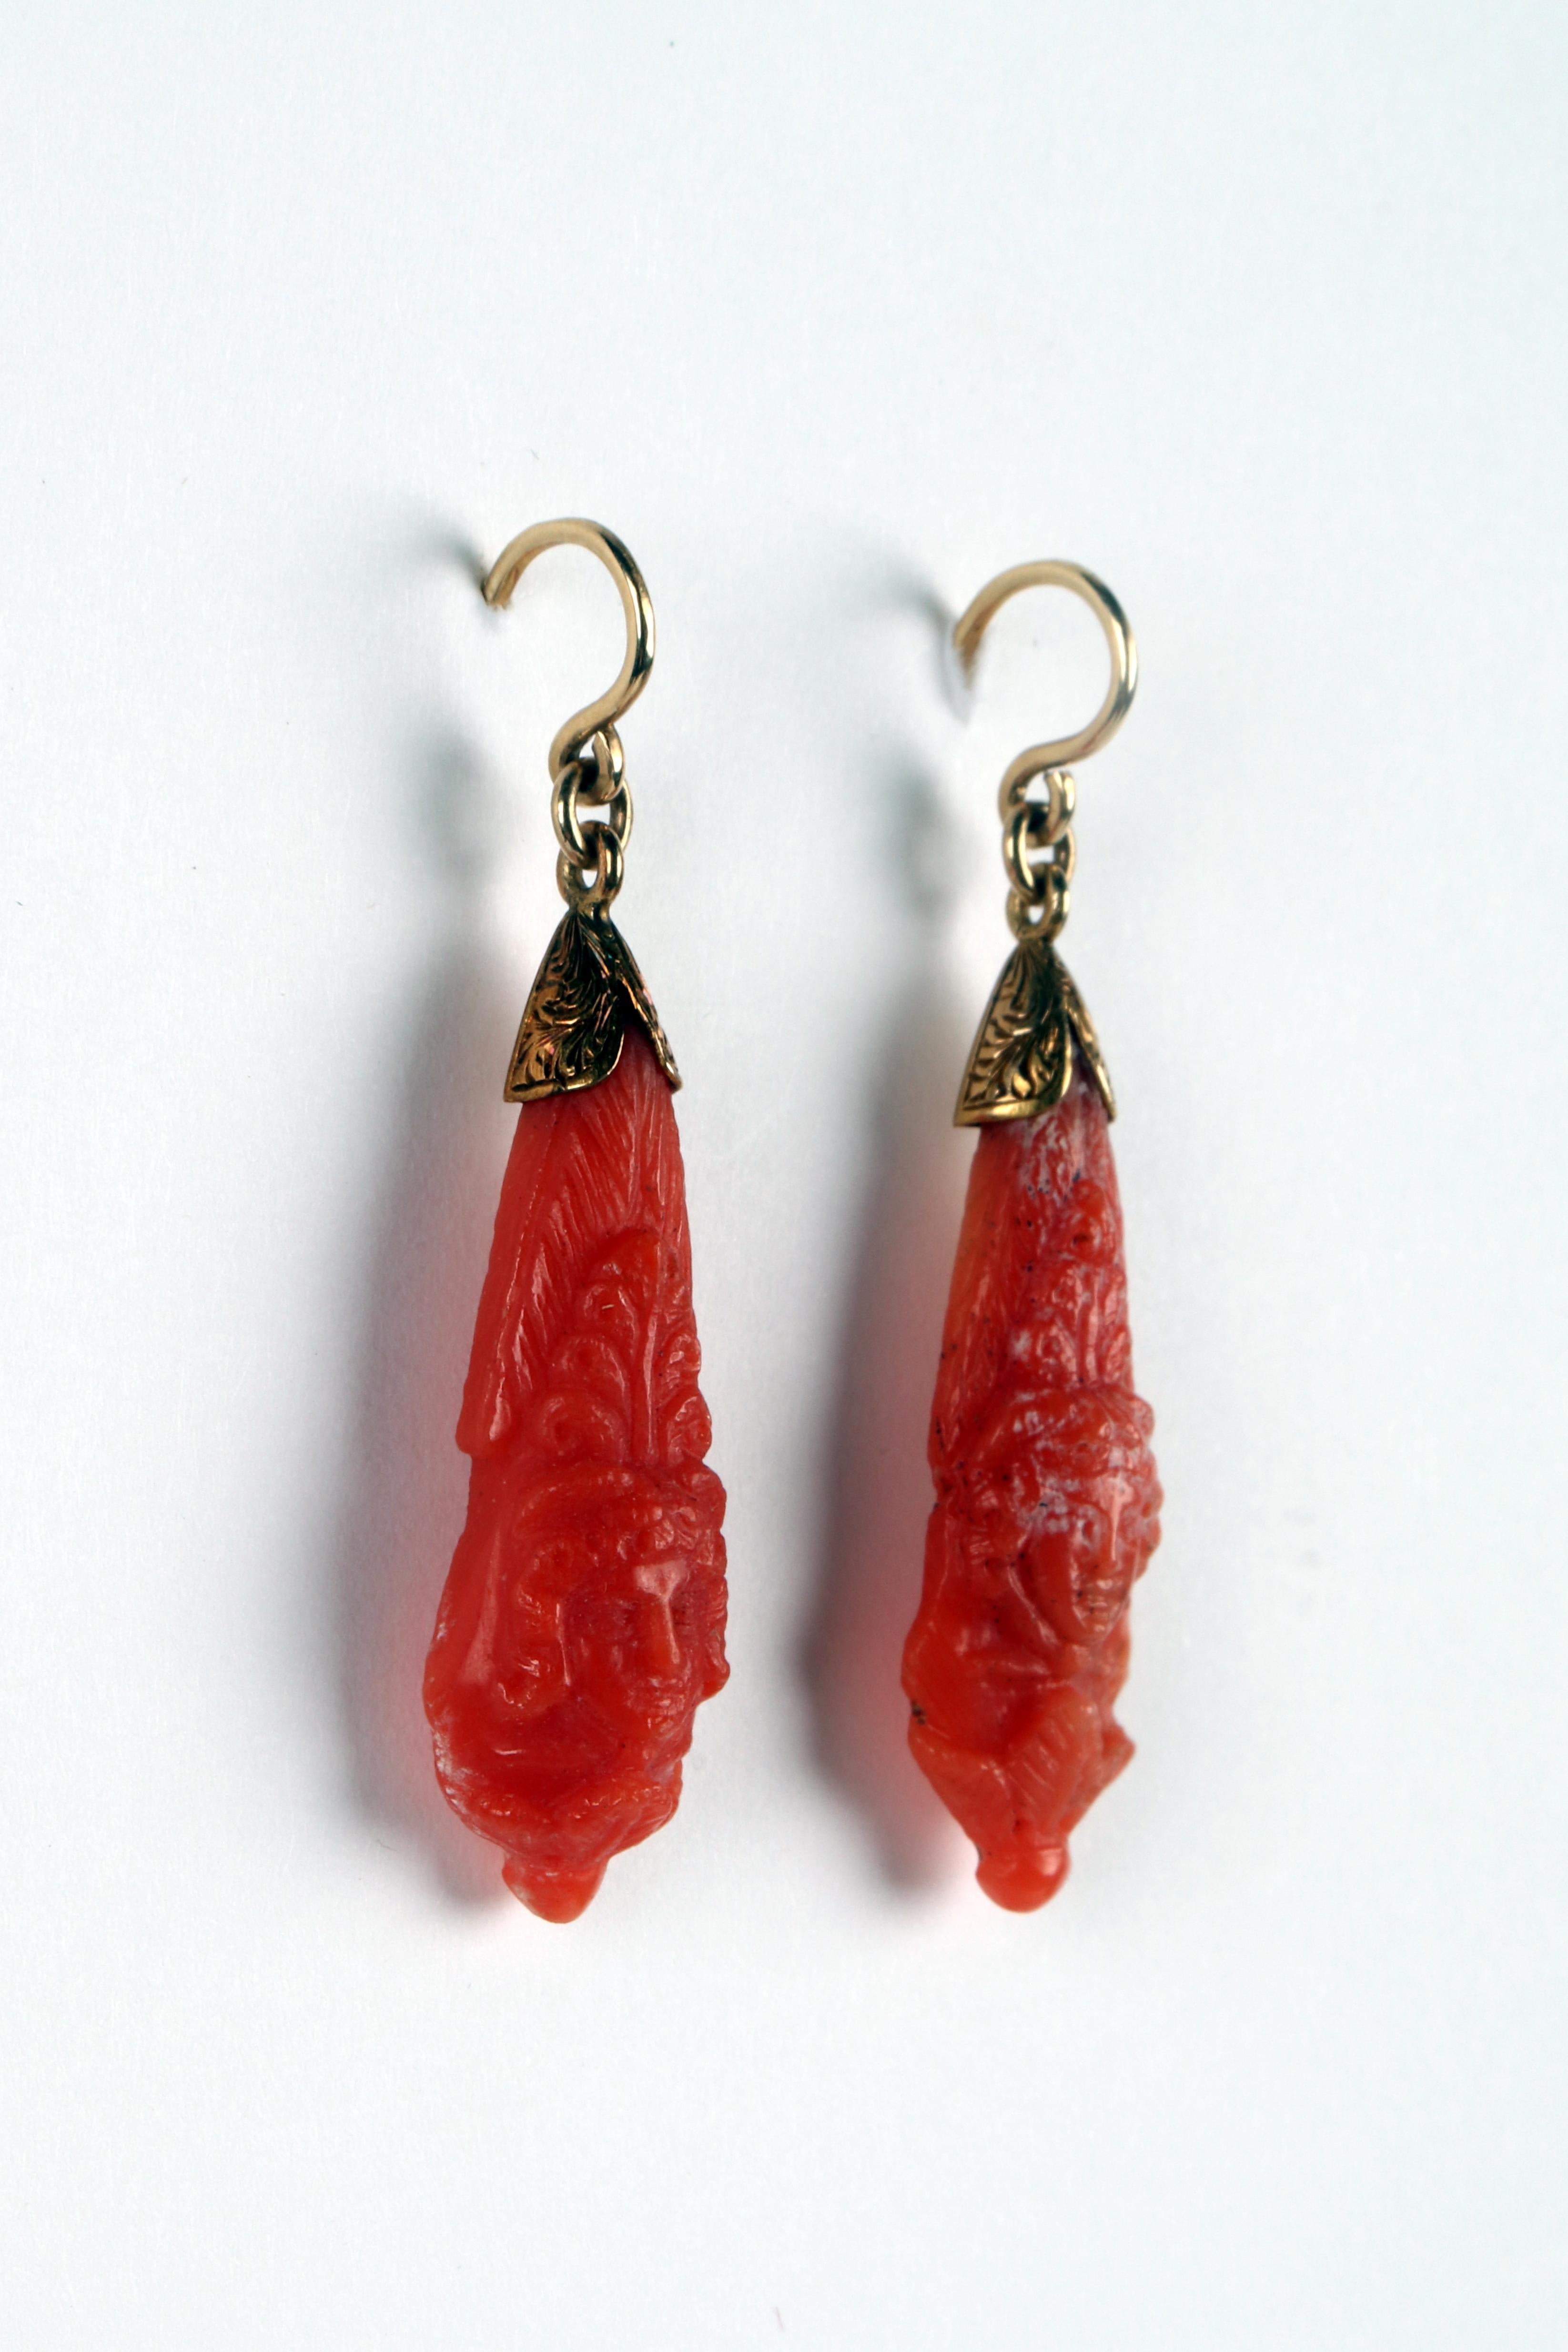 English Victorian earrings in gold and Sciacca coral. England, 1880. For Sale